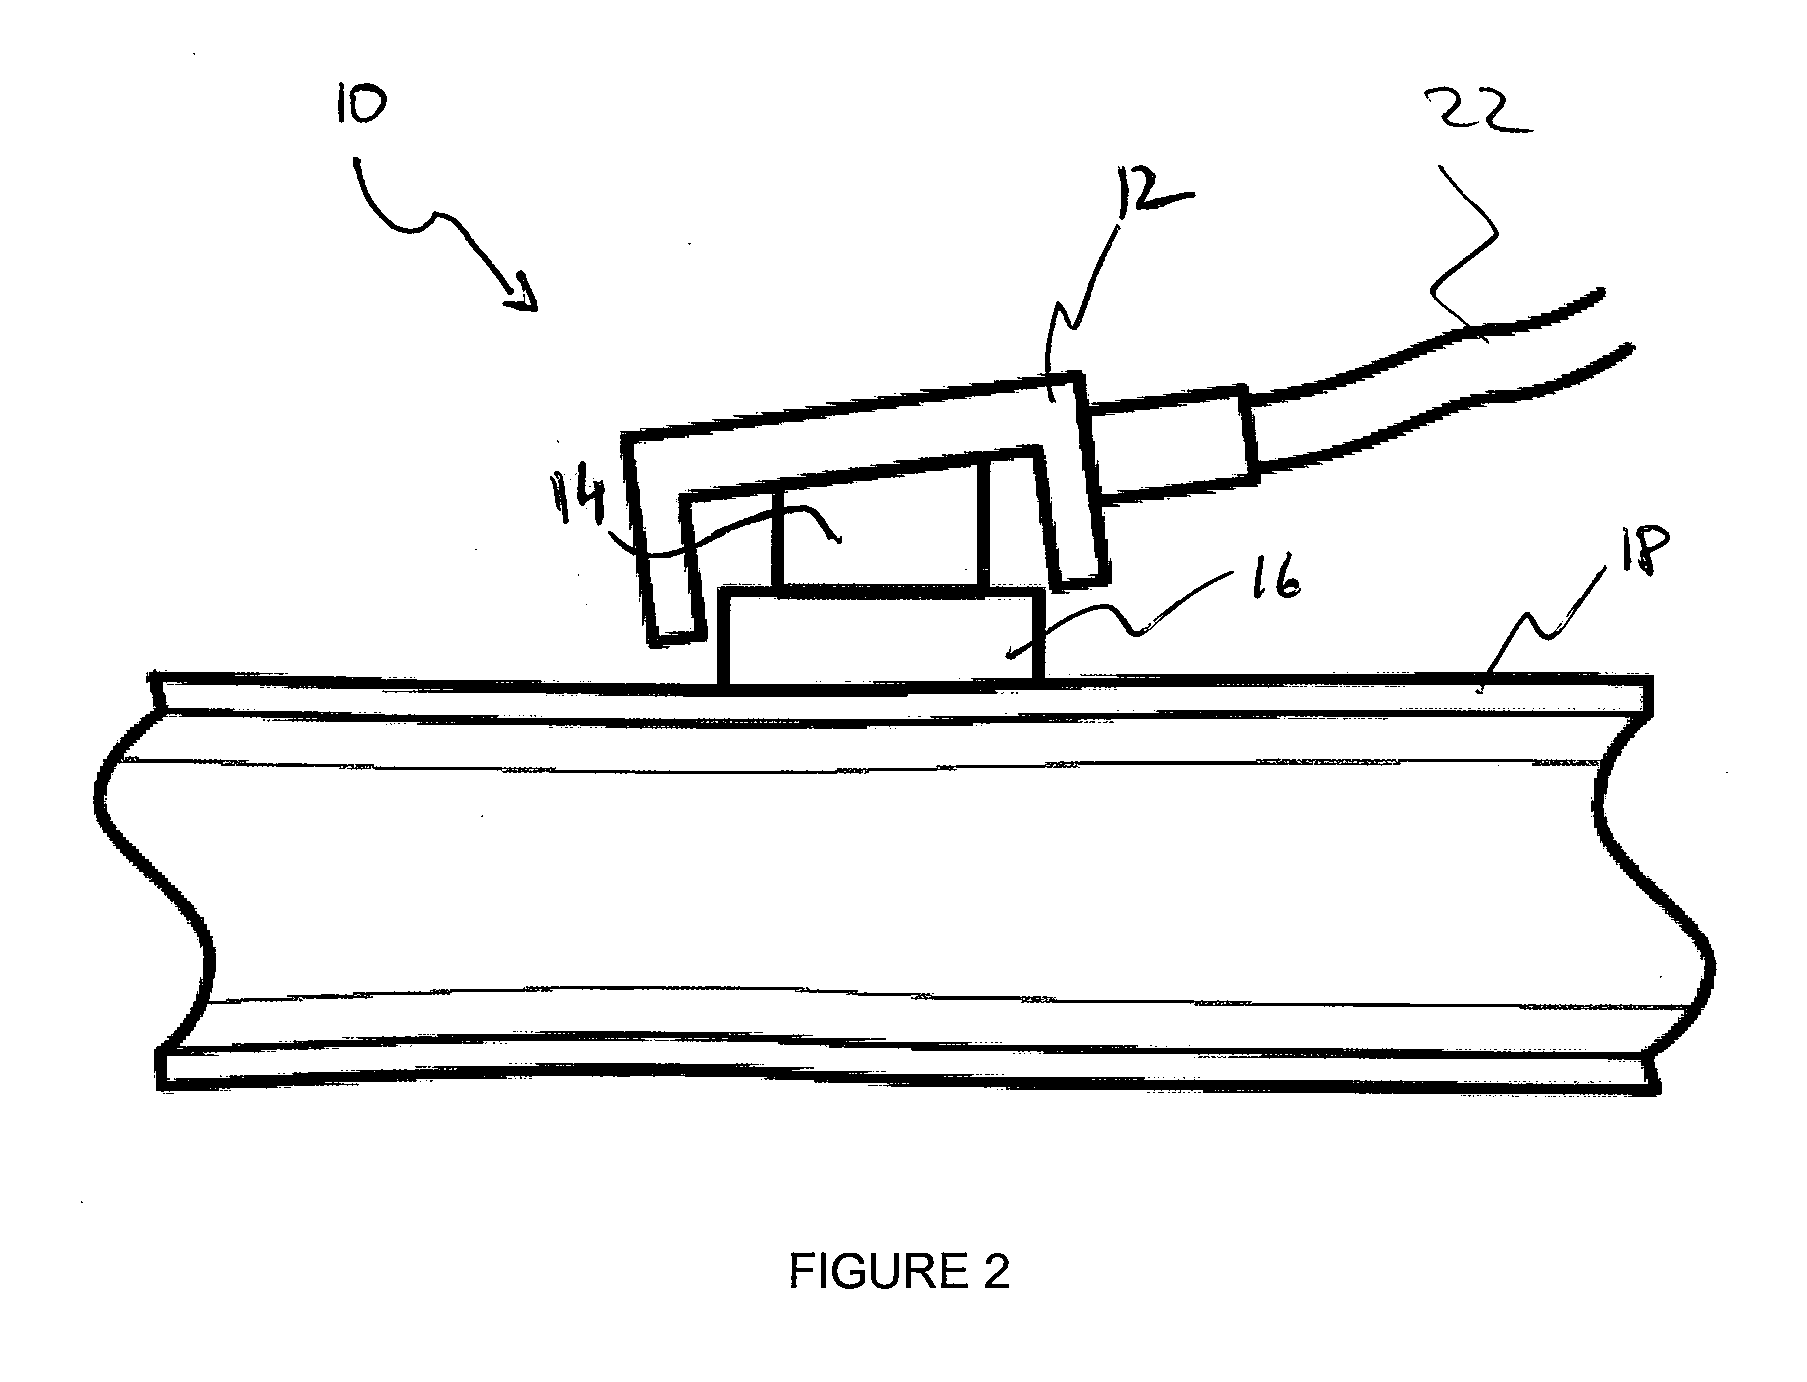 Treatment apparatus for external application to a mammal body